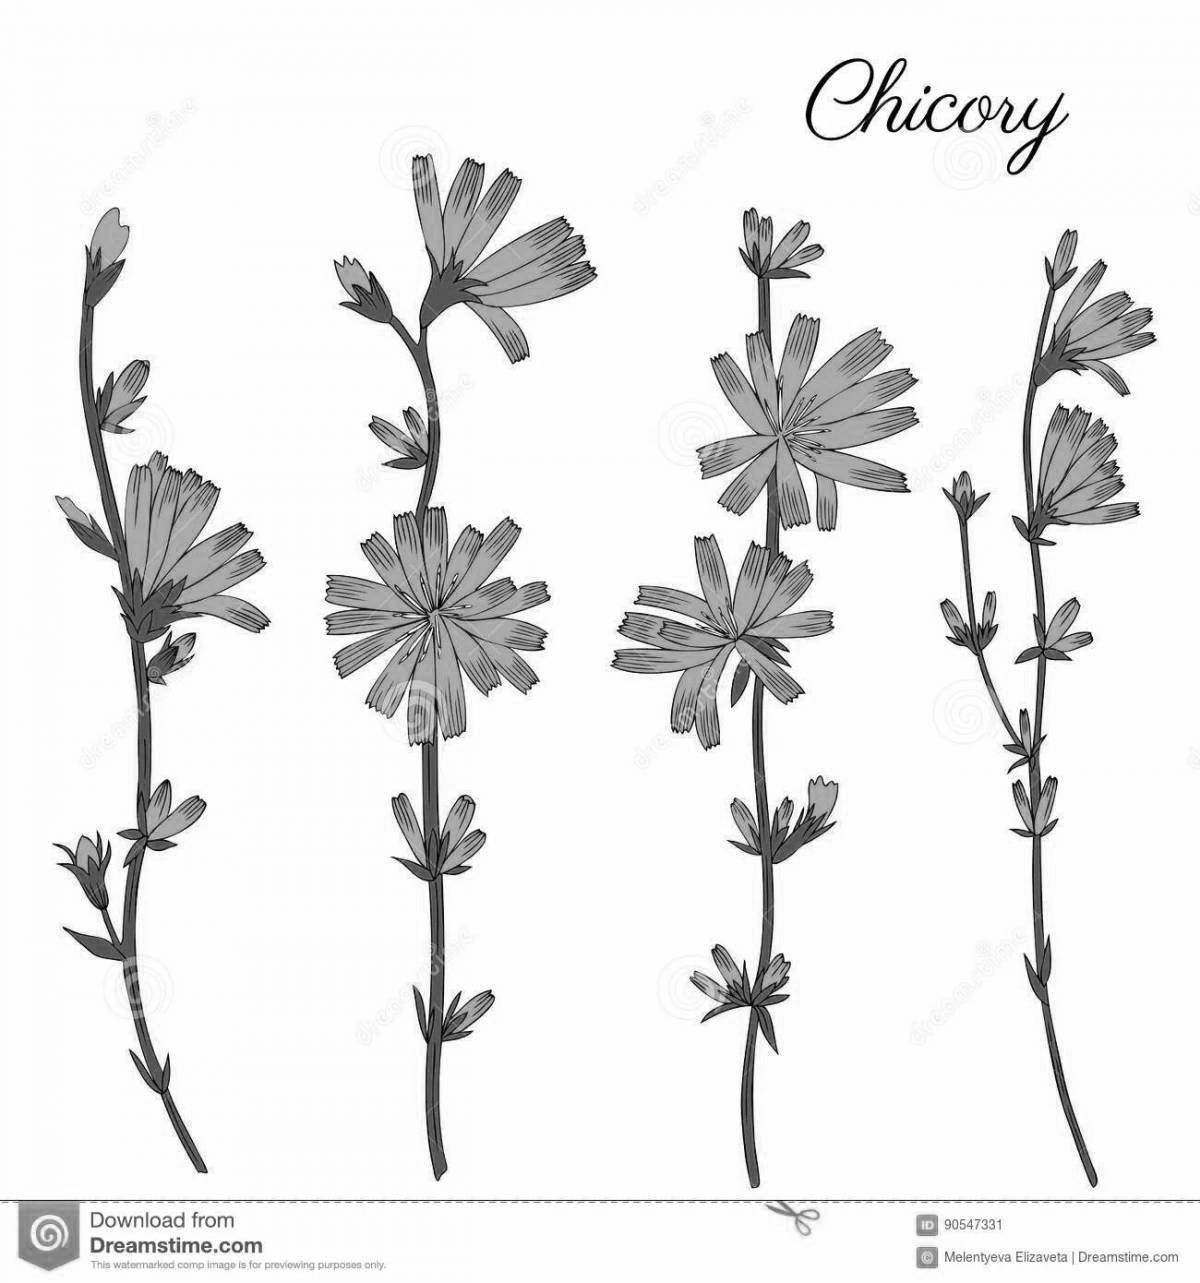 Sweet chicory coloring page